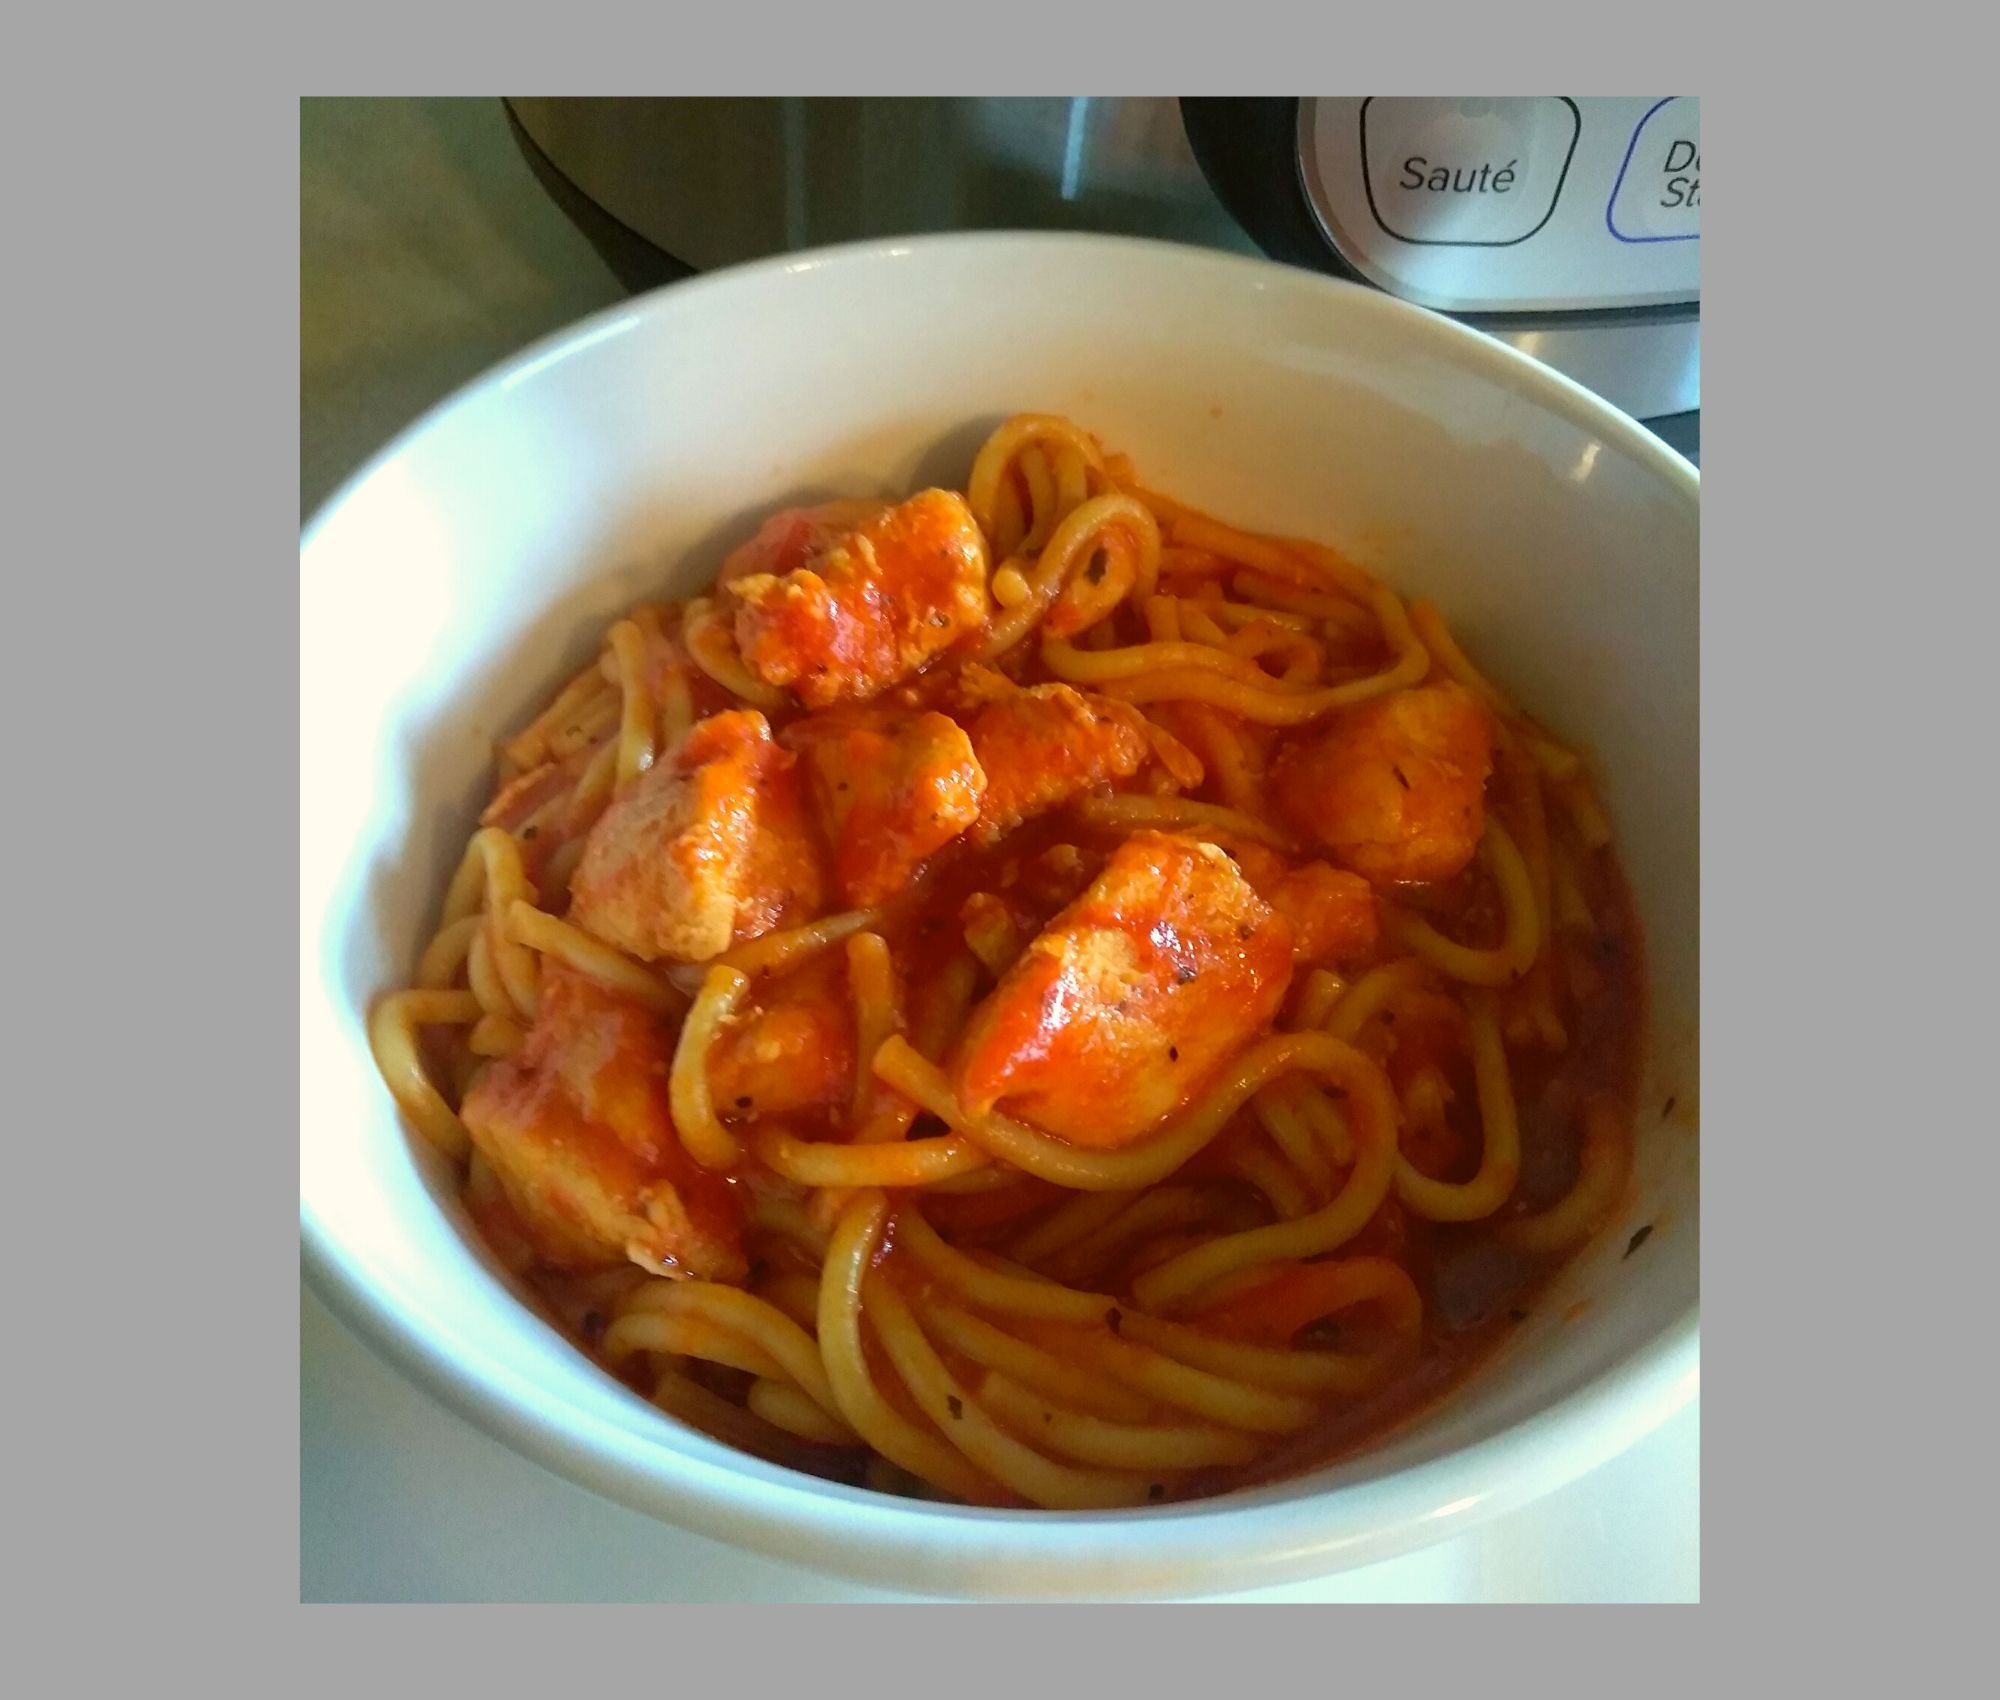 A white bowl filled with chicken spaghetti sitting on a kitchen counter.